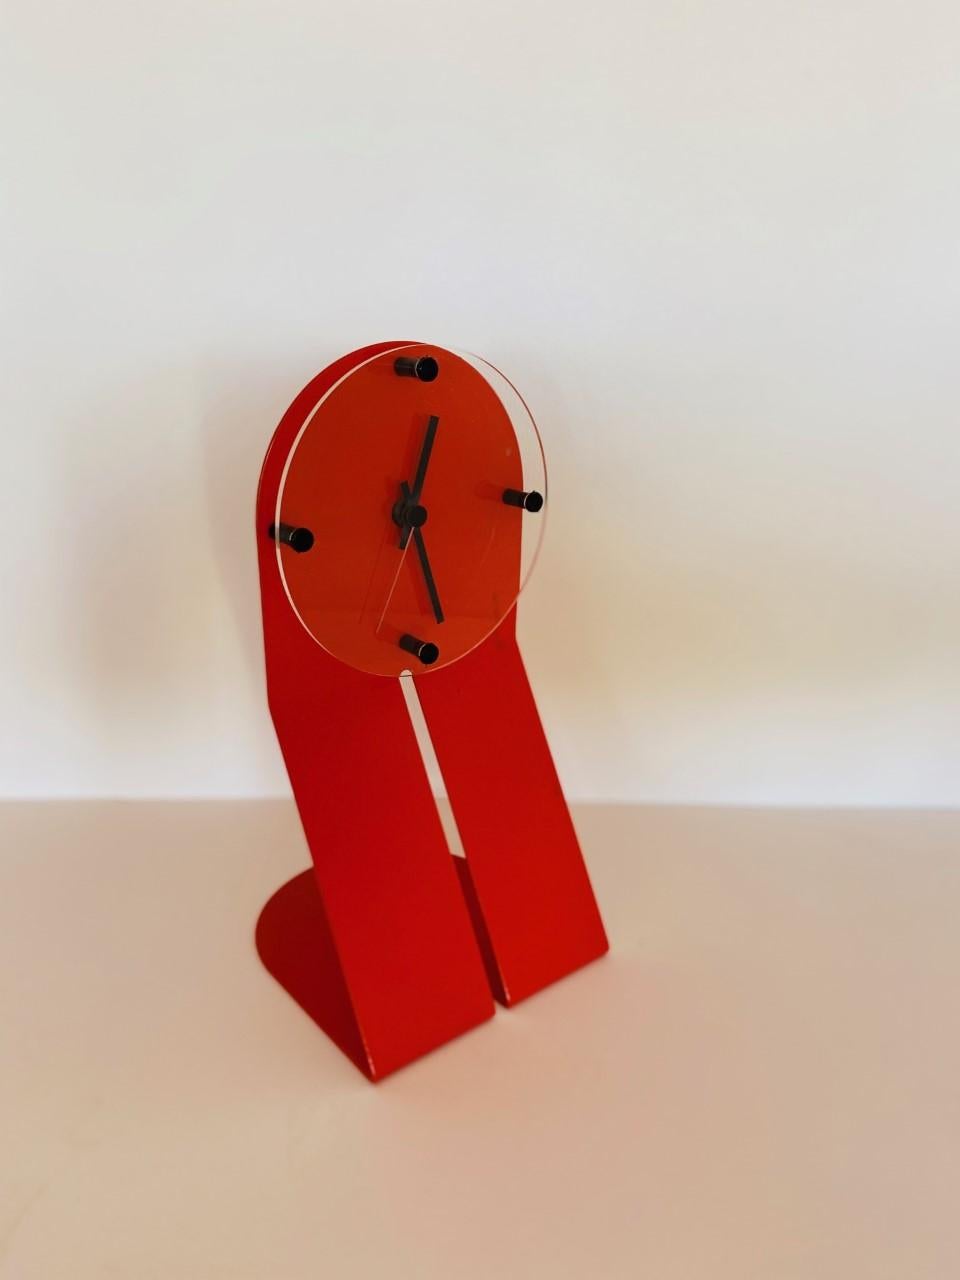 Modern Vintage Zig Metal Clock by Seccose “Clocky Clock” For Sale